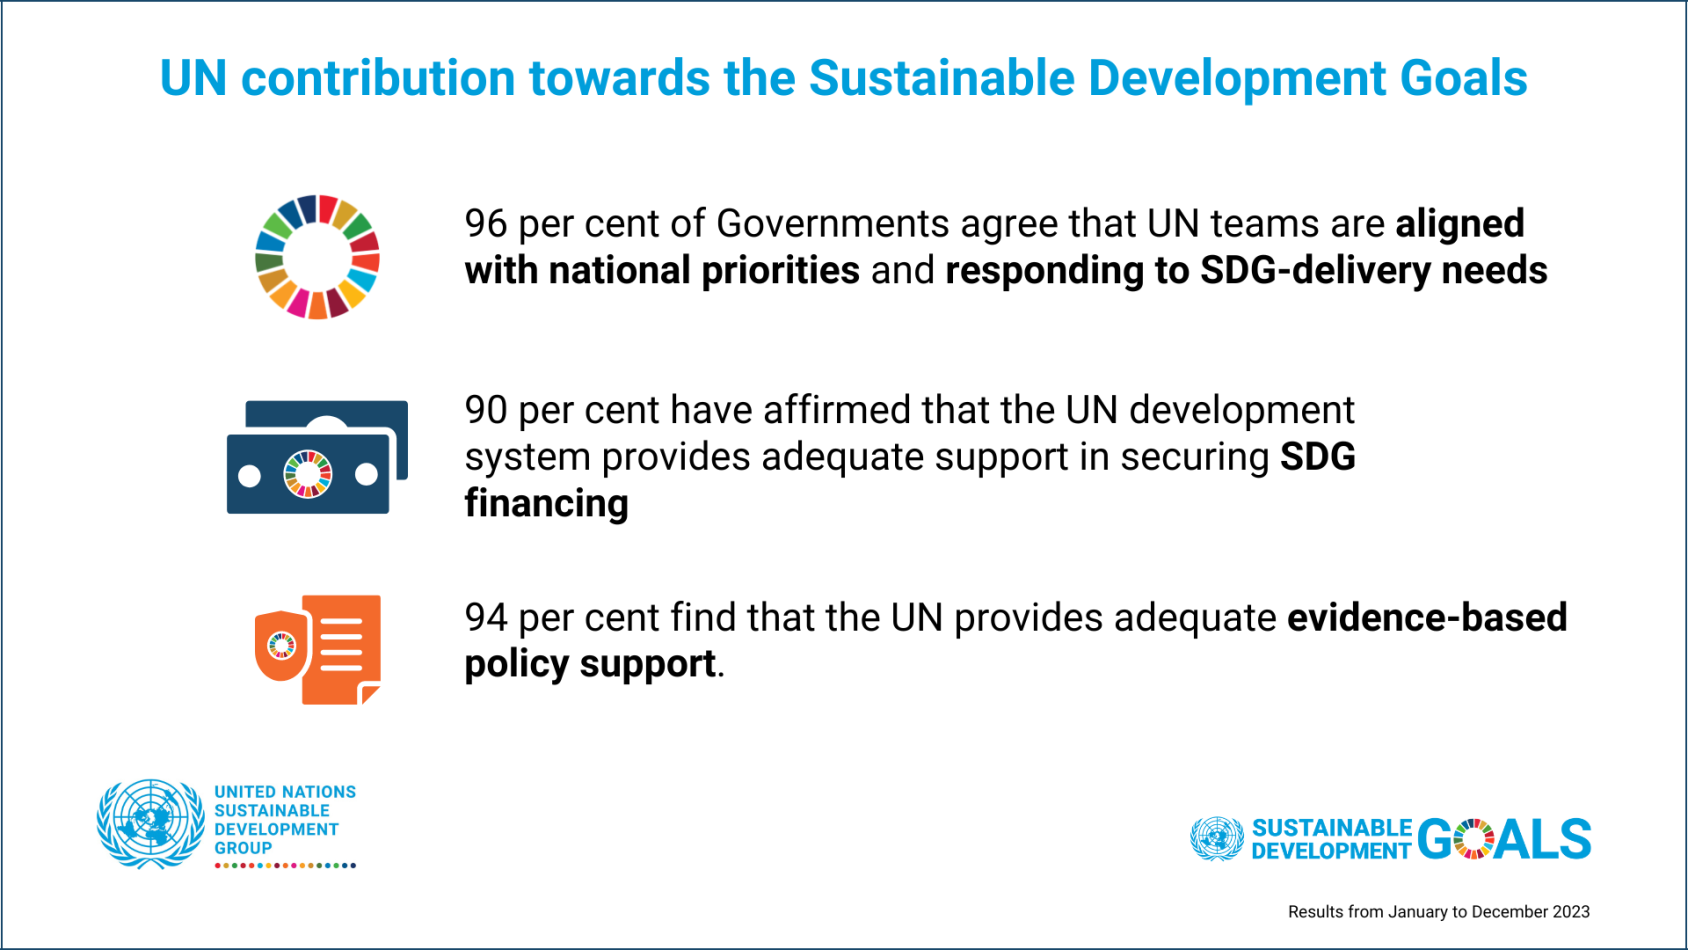 An infographic titled ‘UN contribution towards the Sustainable Development Goals’ with statistics on government alignment and support. It includes three key points: 96% of governments agree UN teams align with national priorities for SDG delivery, 90% affirm UN provides adequate support for securing SDG financing, and 94% find the UN offers adequate evidence-based policy support. Logos for the United Nations Development Programme Evaluation Group and SDGs are present,  results from January to December 2023 